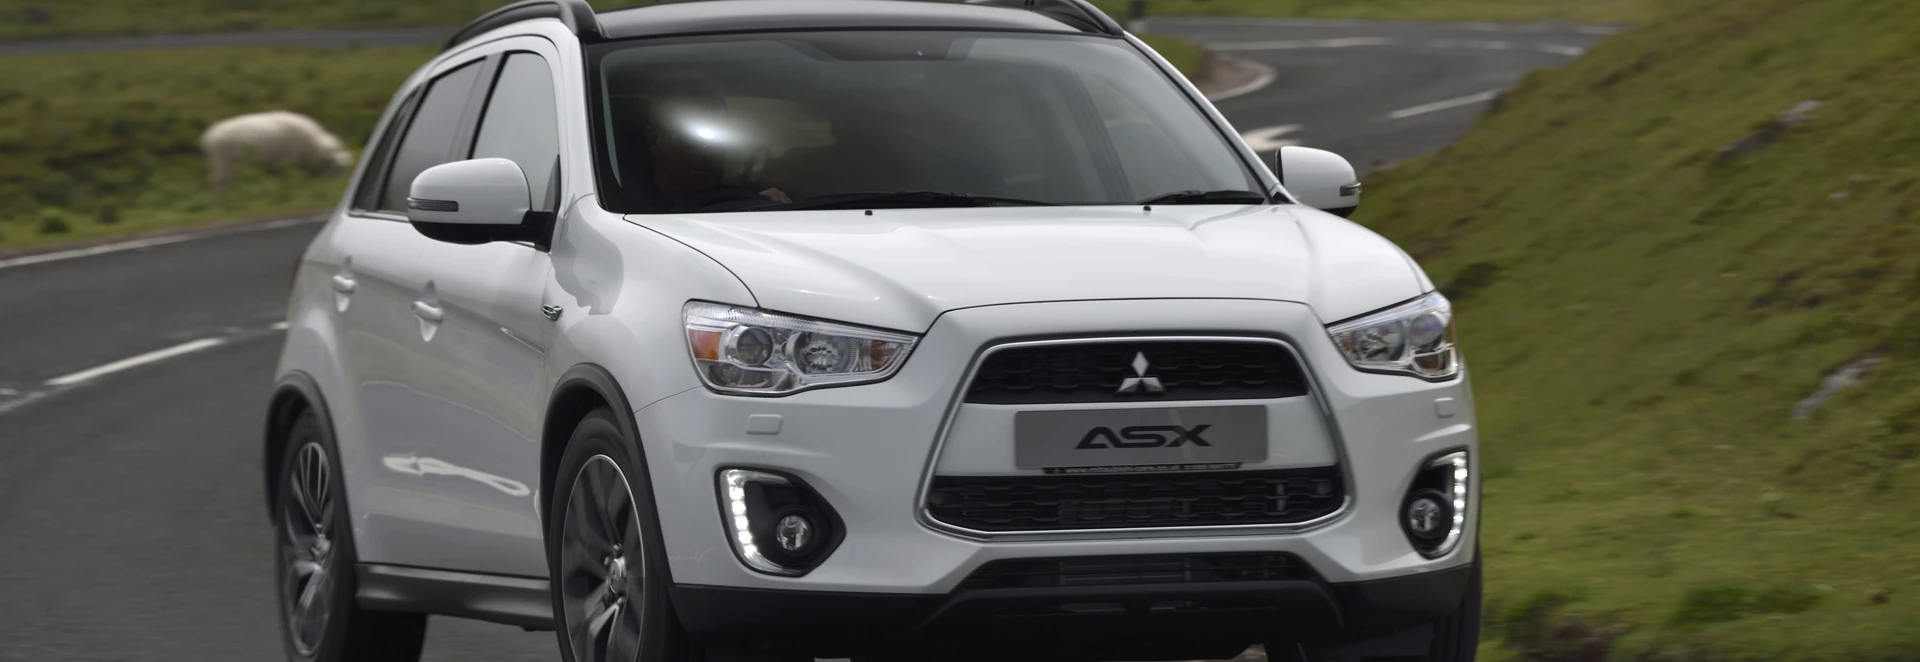 Mitsubishi ASX receives new diesel and styling 